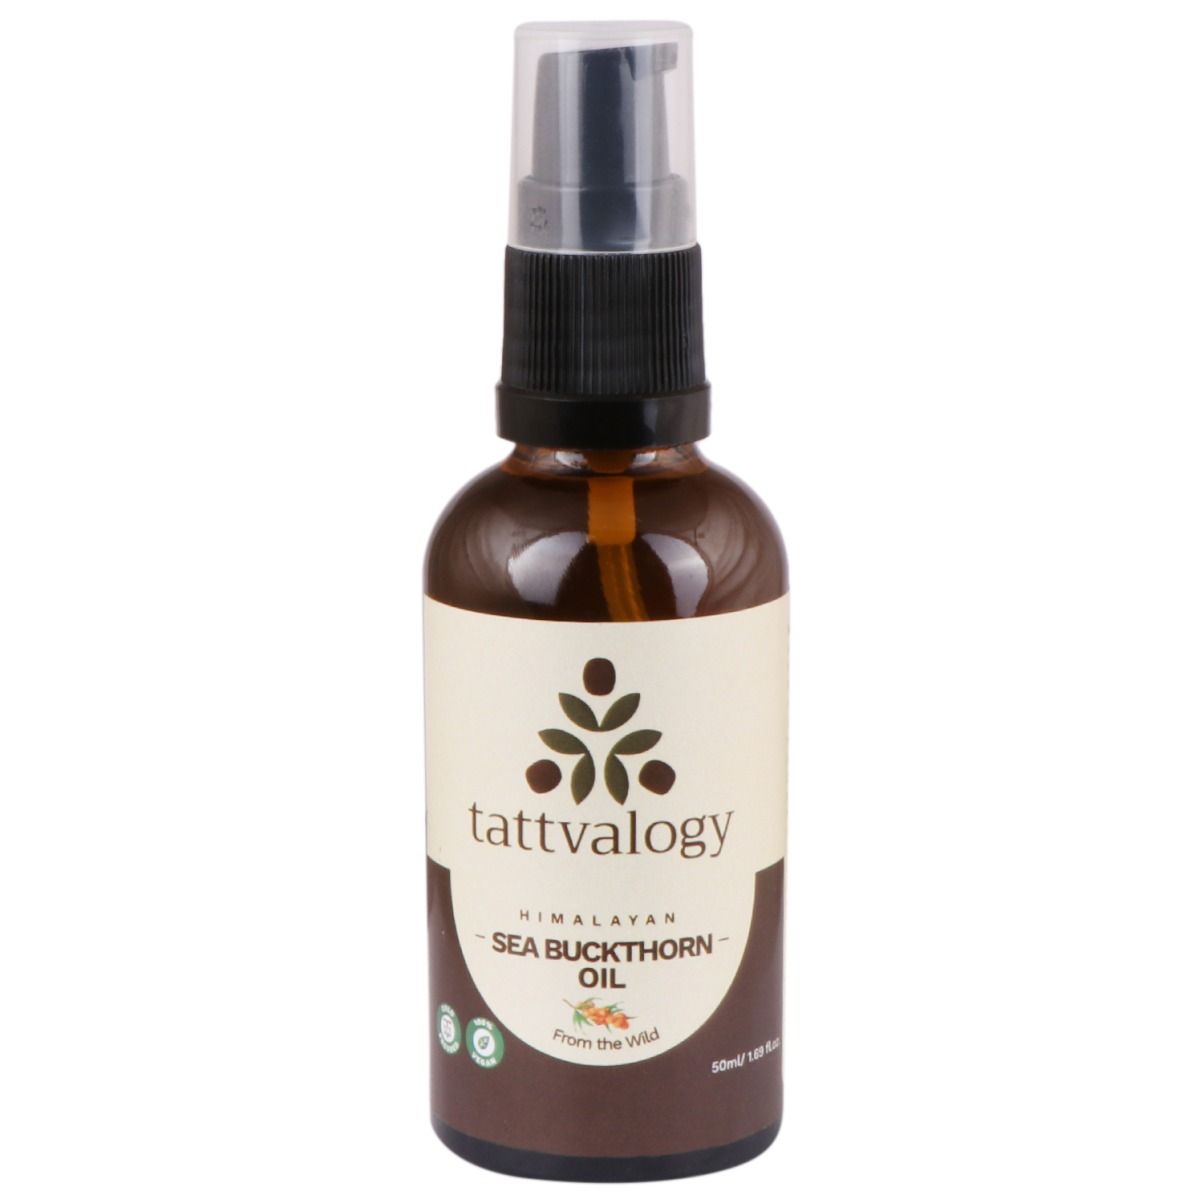 Tattvalogy Cold Pressed Natural Sea Buckthorn Oil